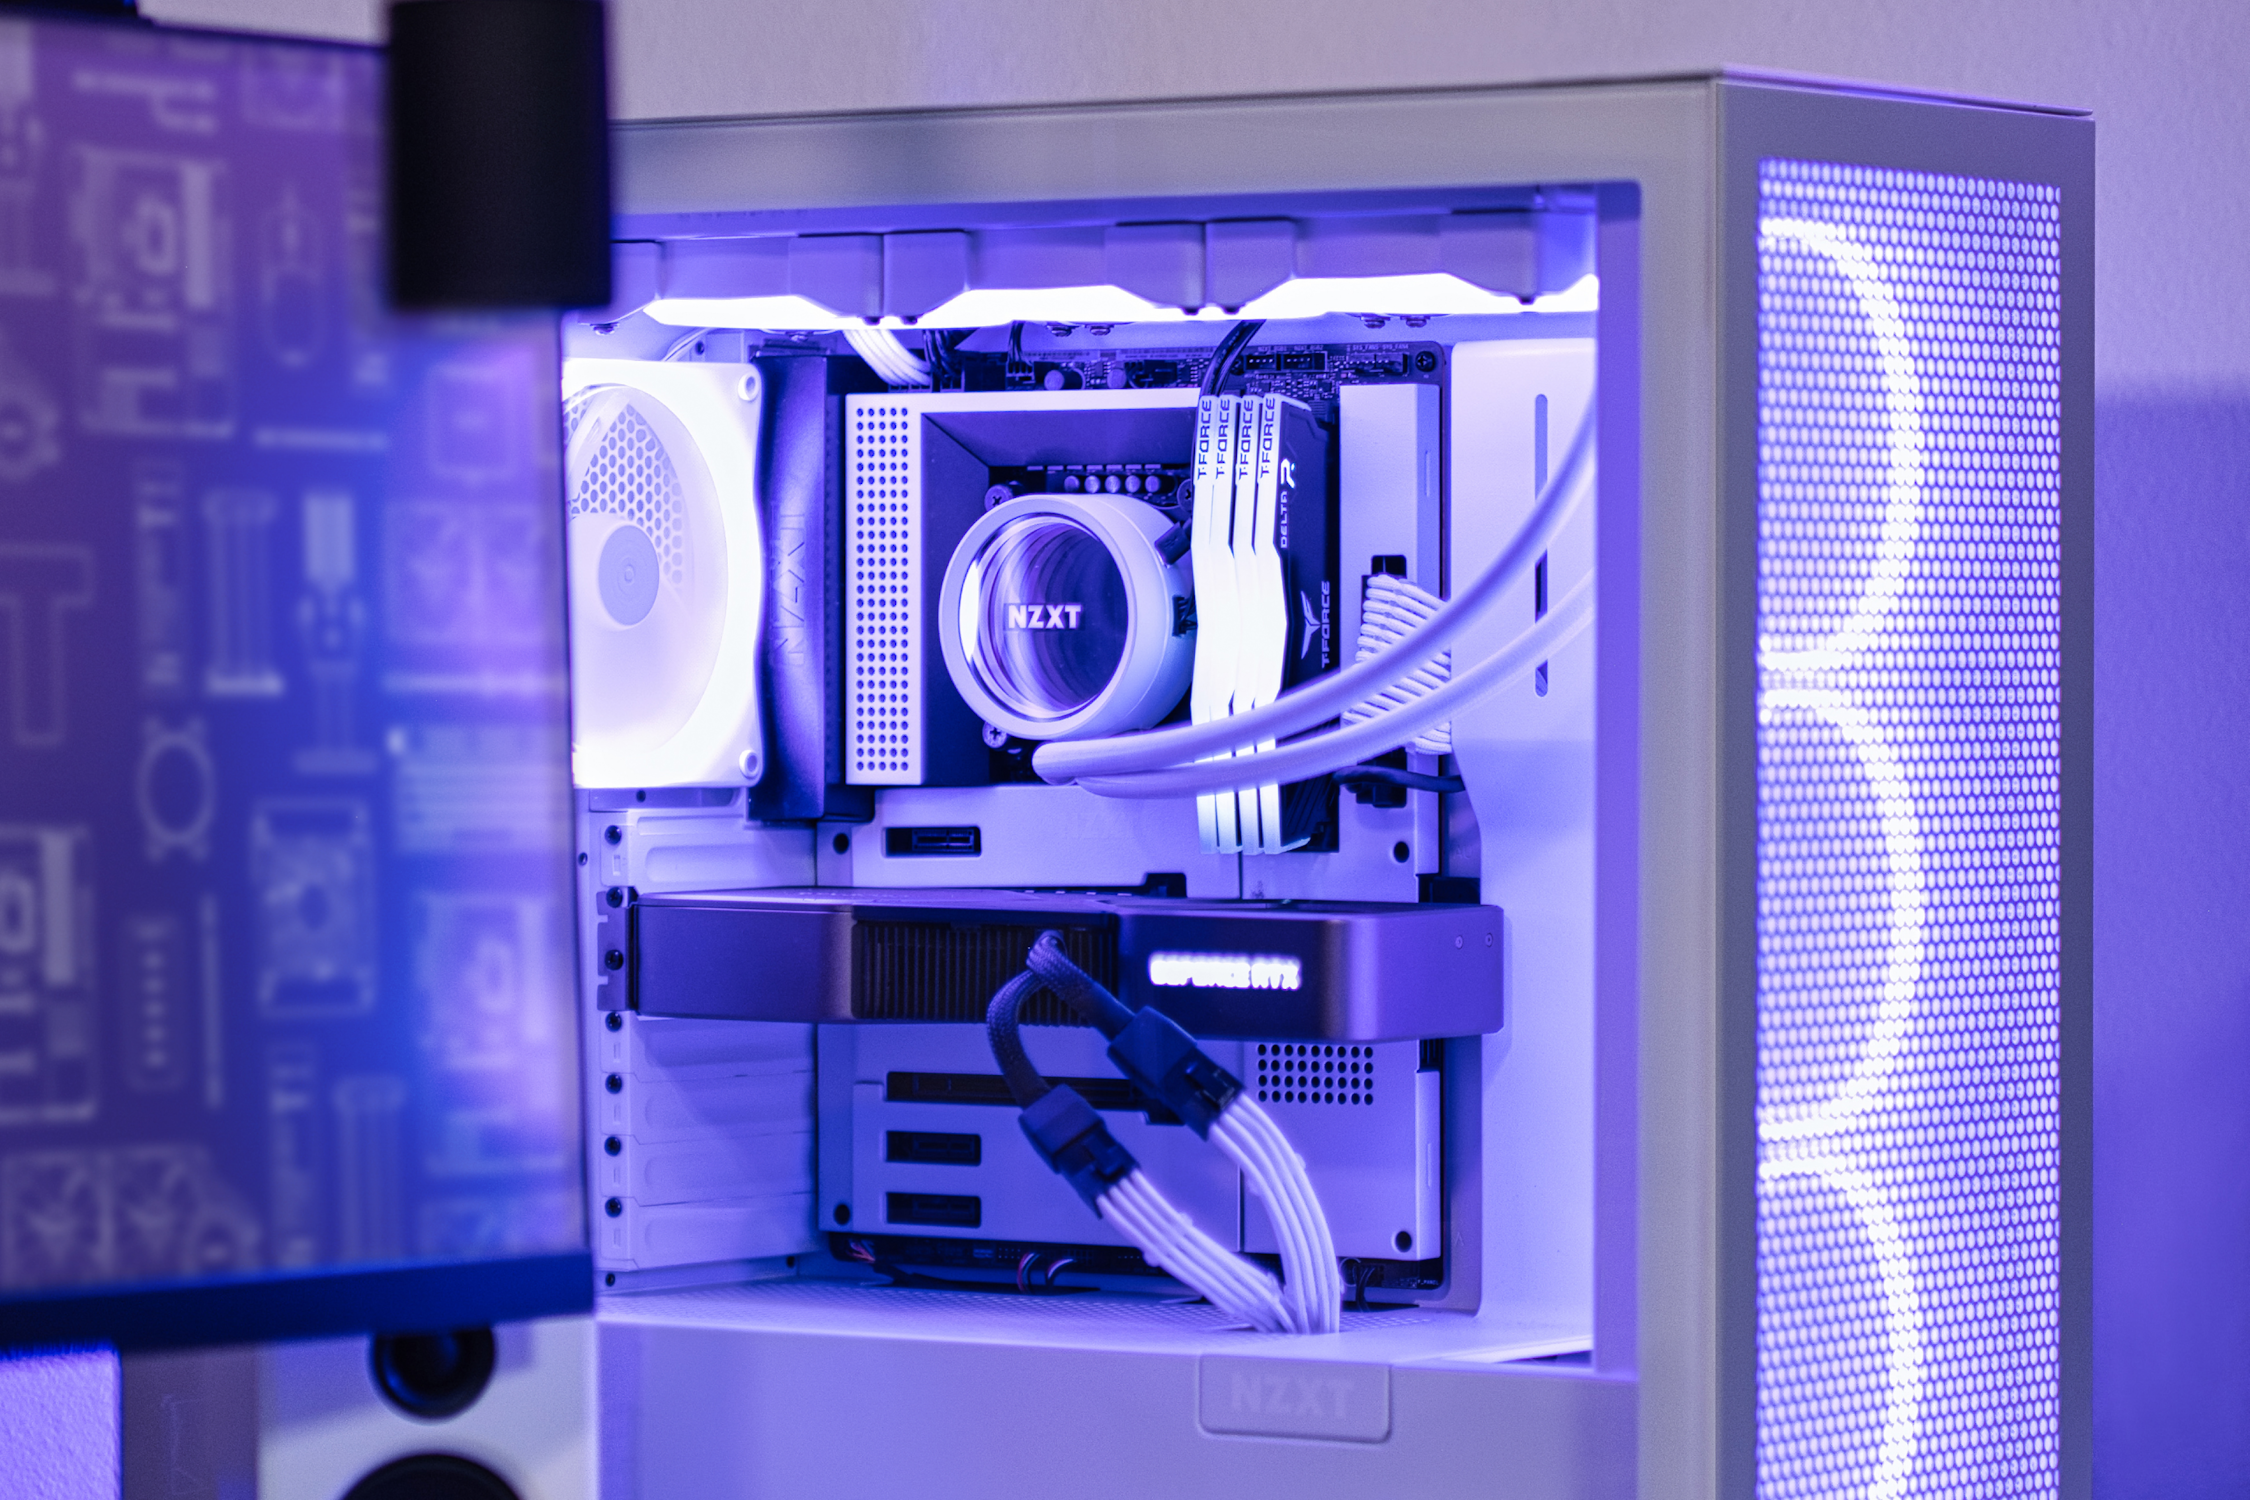 NZXT Launches Stunning Line Of 'Player' Pre-Built Gaming PCs